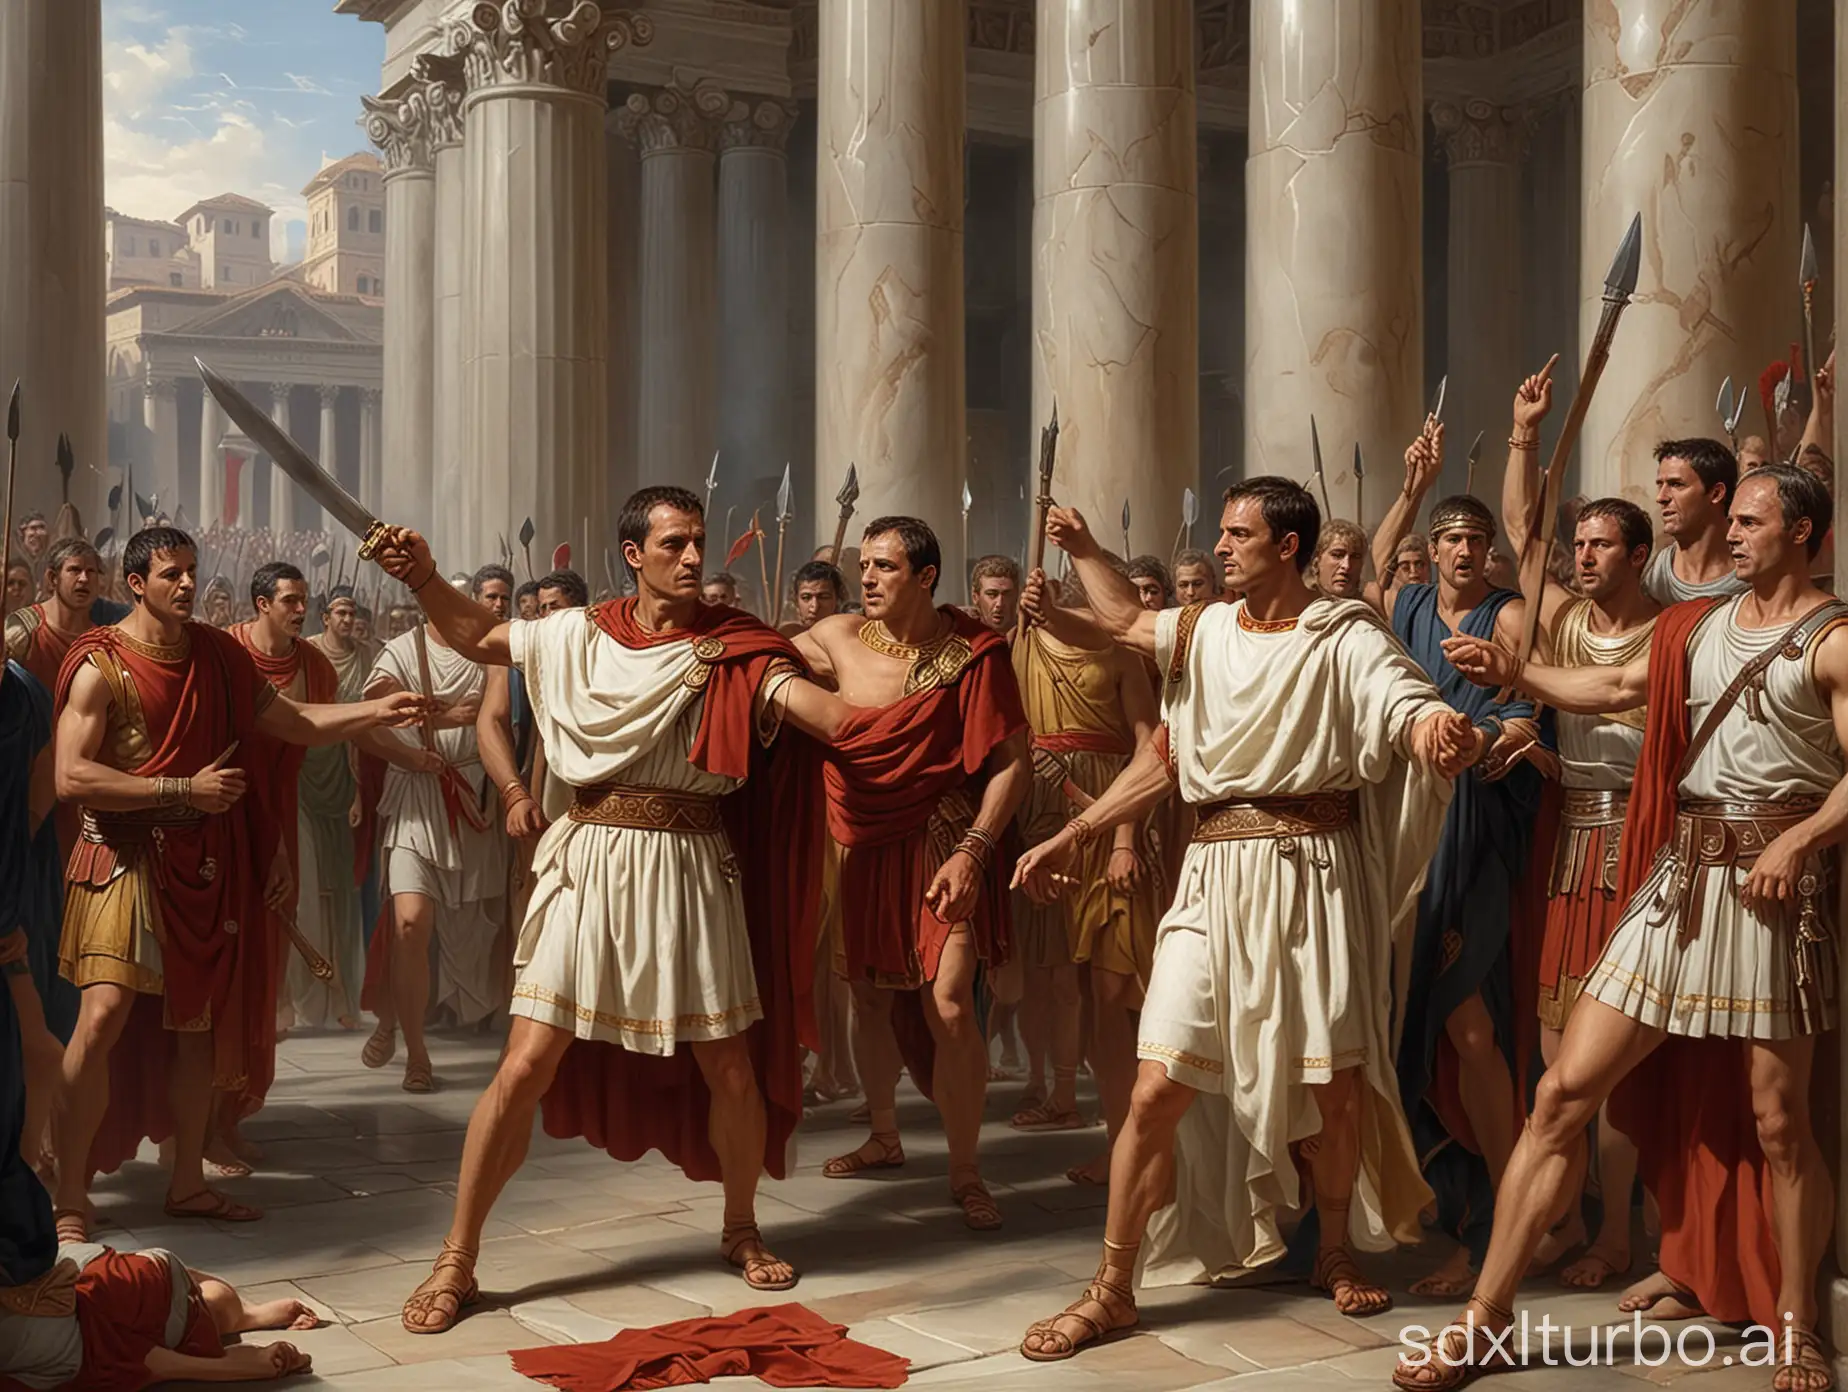 Historical reappearance: When Julius Caesar arrived at the Roman Senate, one of the conspirators suddenly pulled at Caesar's toga, and a group of conspirators swarmed over him and attacked him with daggers.